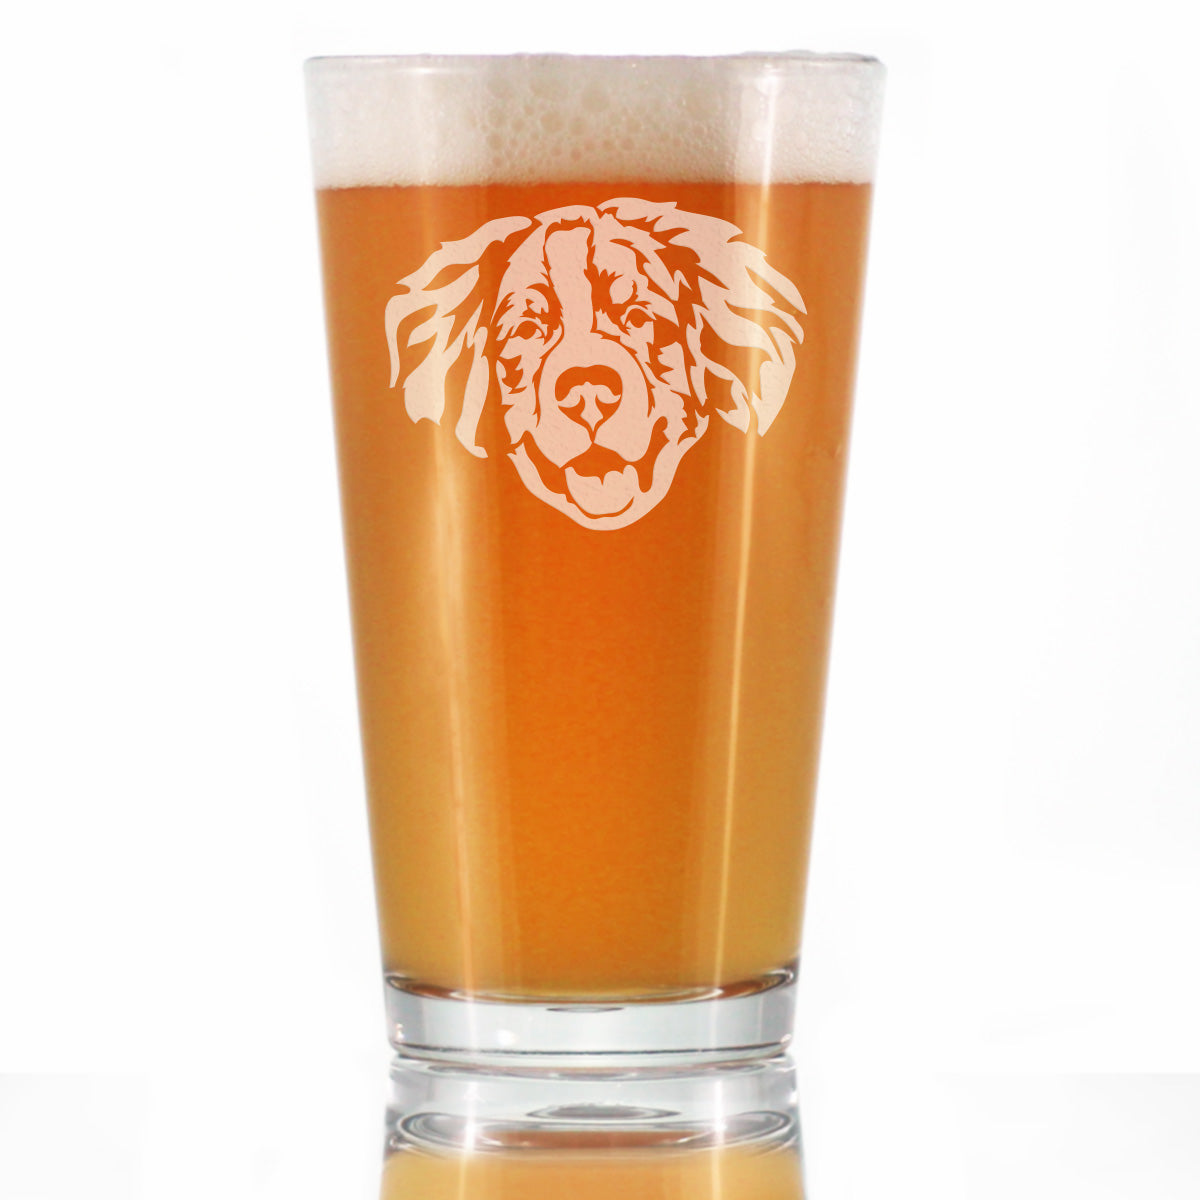 Bernese Mountain Dog Face Pint Glass for Beer - Unique Dog Themed Decor and Gifts for Moms & Dads of Berneses - 16 Oz